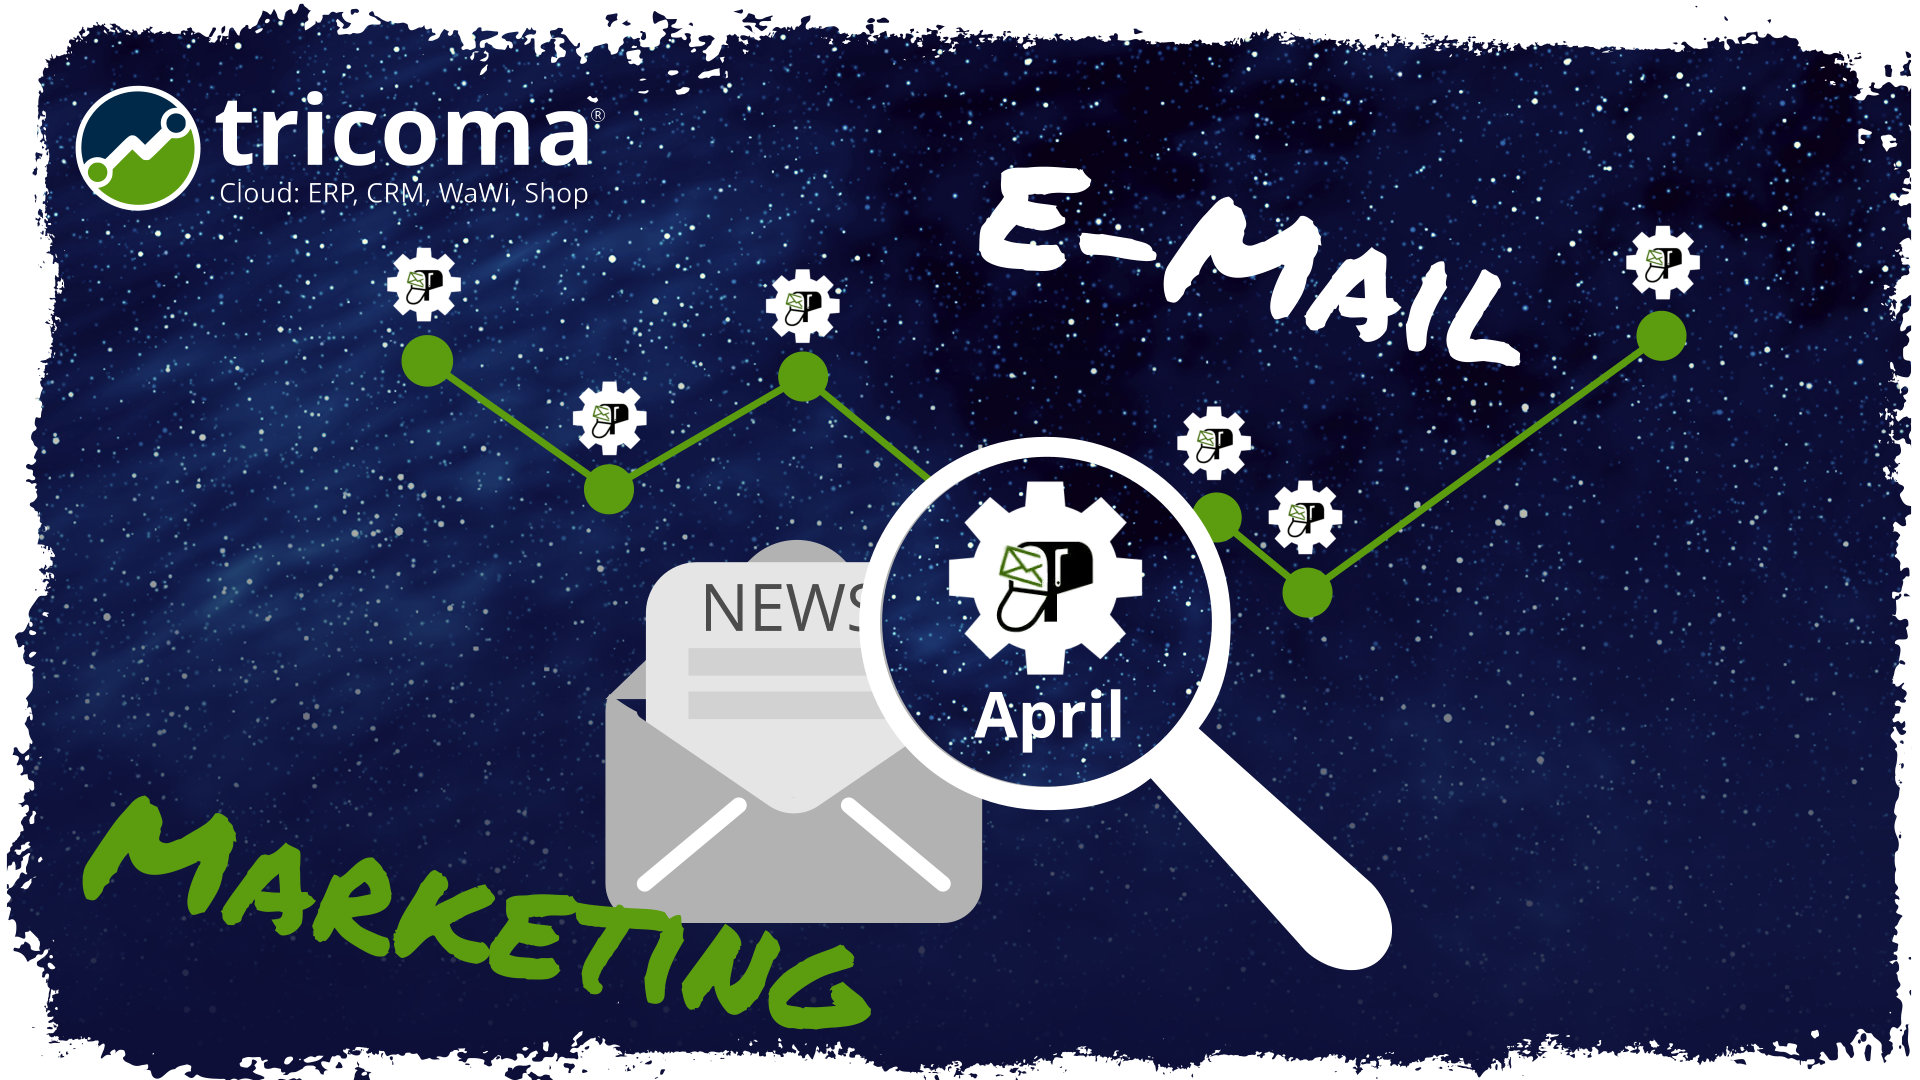 App Email Marketing